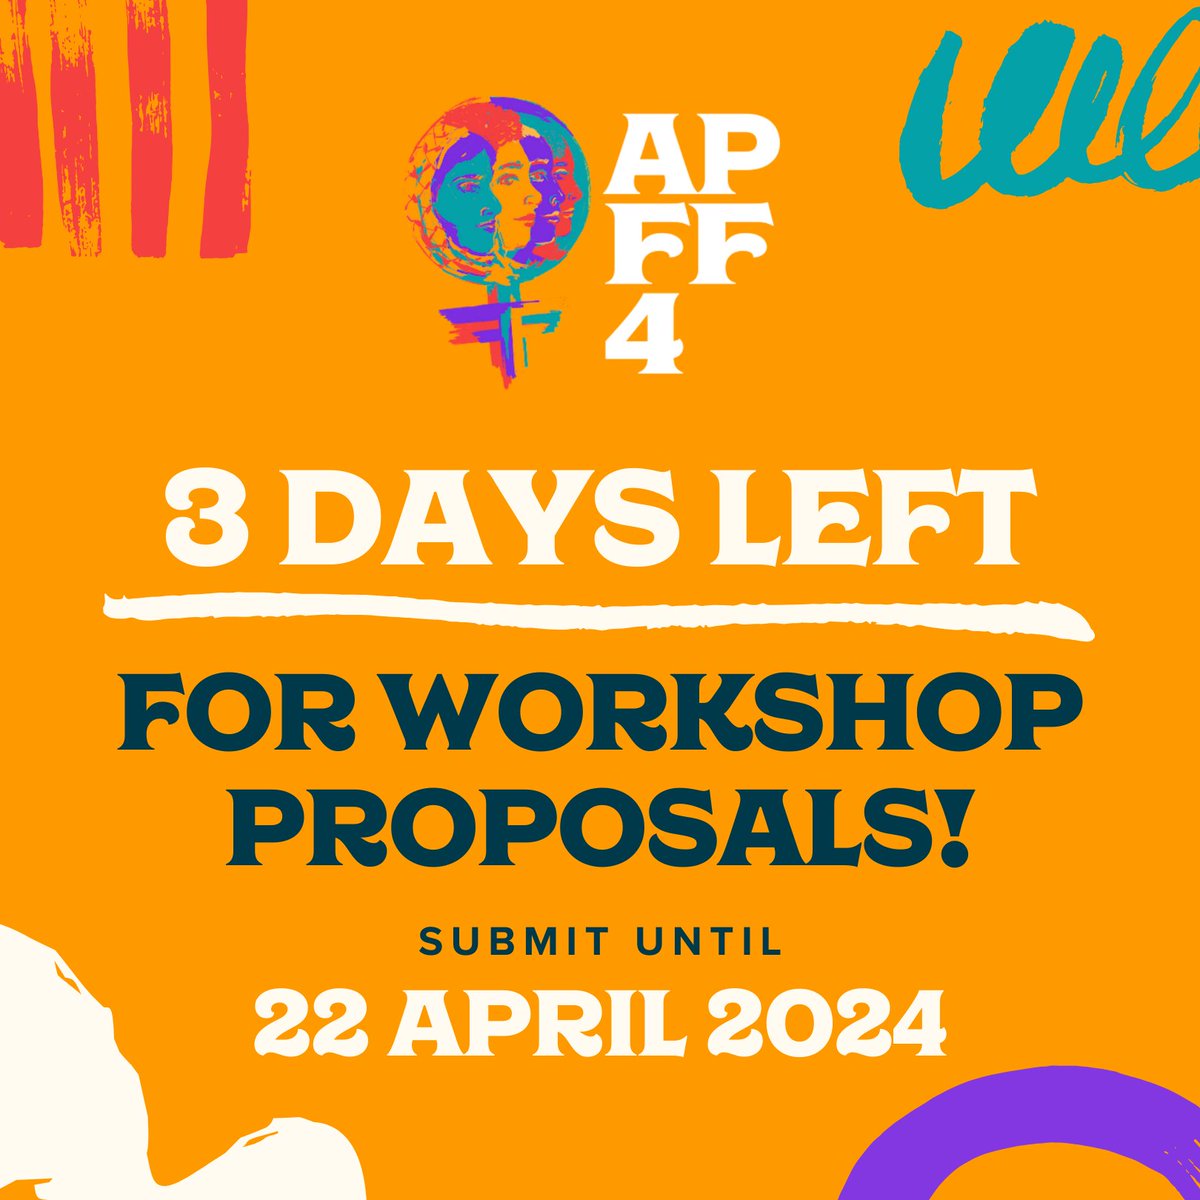 ‼️Three days left to submit workshop proposals for the Asia Pacific Feminist Forum 2024 #APFF4‼️ 🔗The deadline for submissions is 22 April 2024, you can read more about the kind of workshops we are looking for in our call for workshops, visit apwld.org/call-for-works…